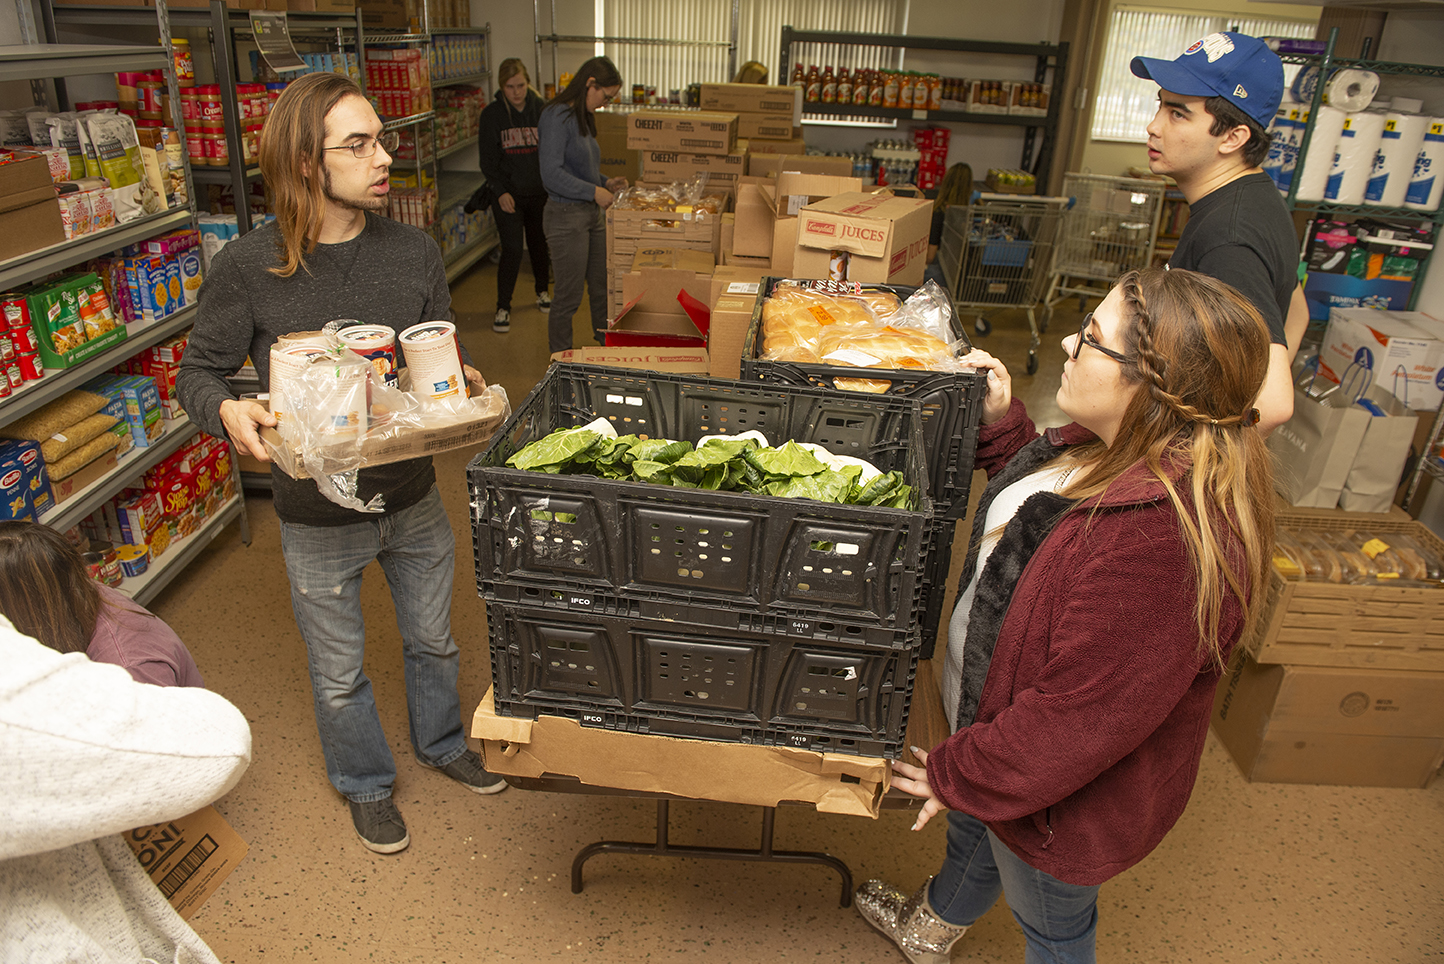 Noah Tang (right) and Jeanna Campbell were among the ISU students who helped start the food pantry.